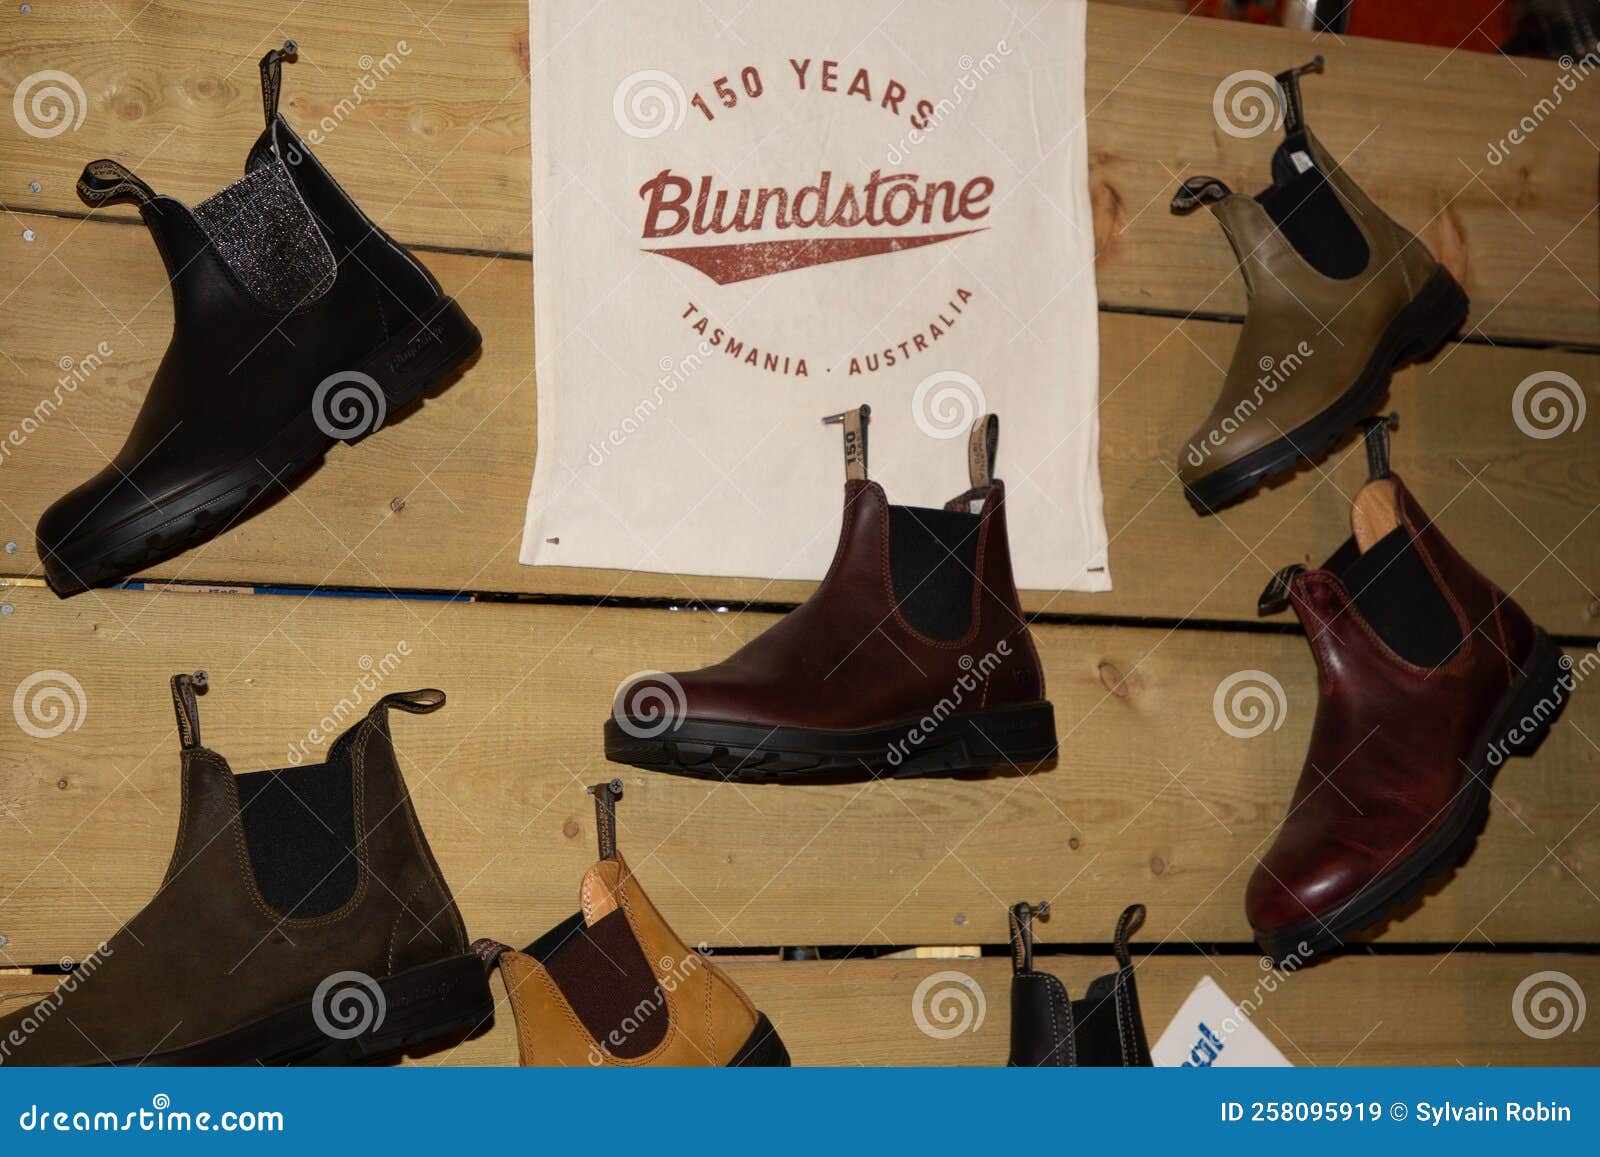 Blundstone Australia Logo Text and Sign Brand on New Shoes from New ...